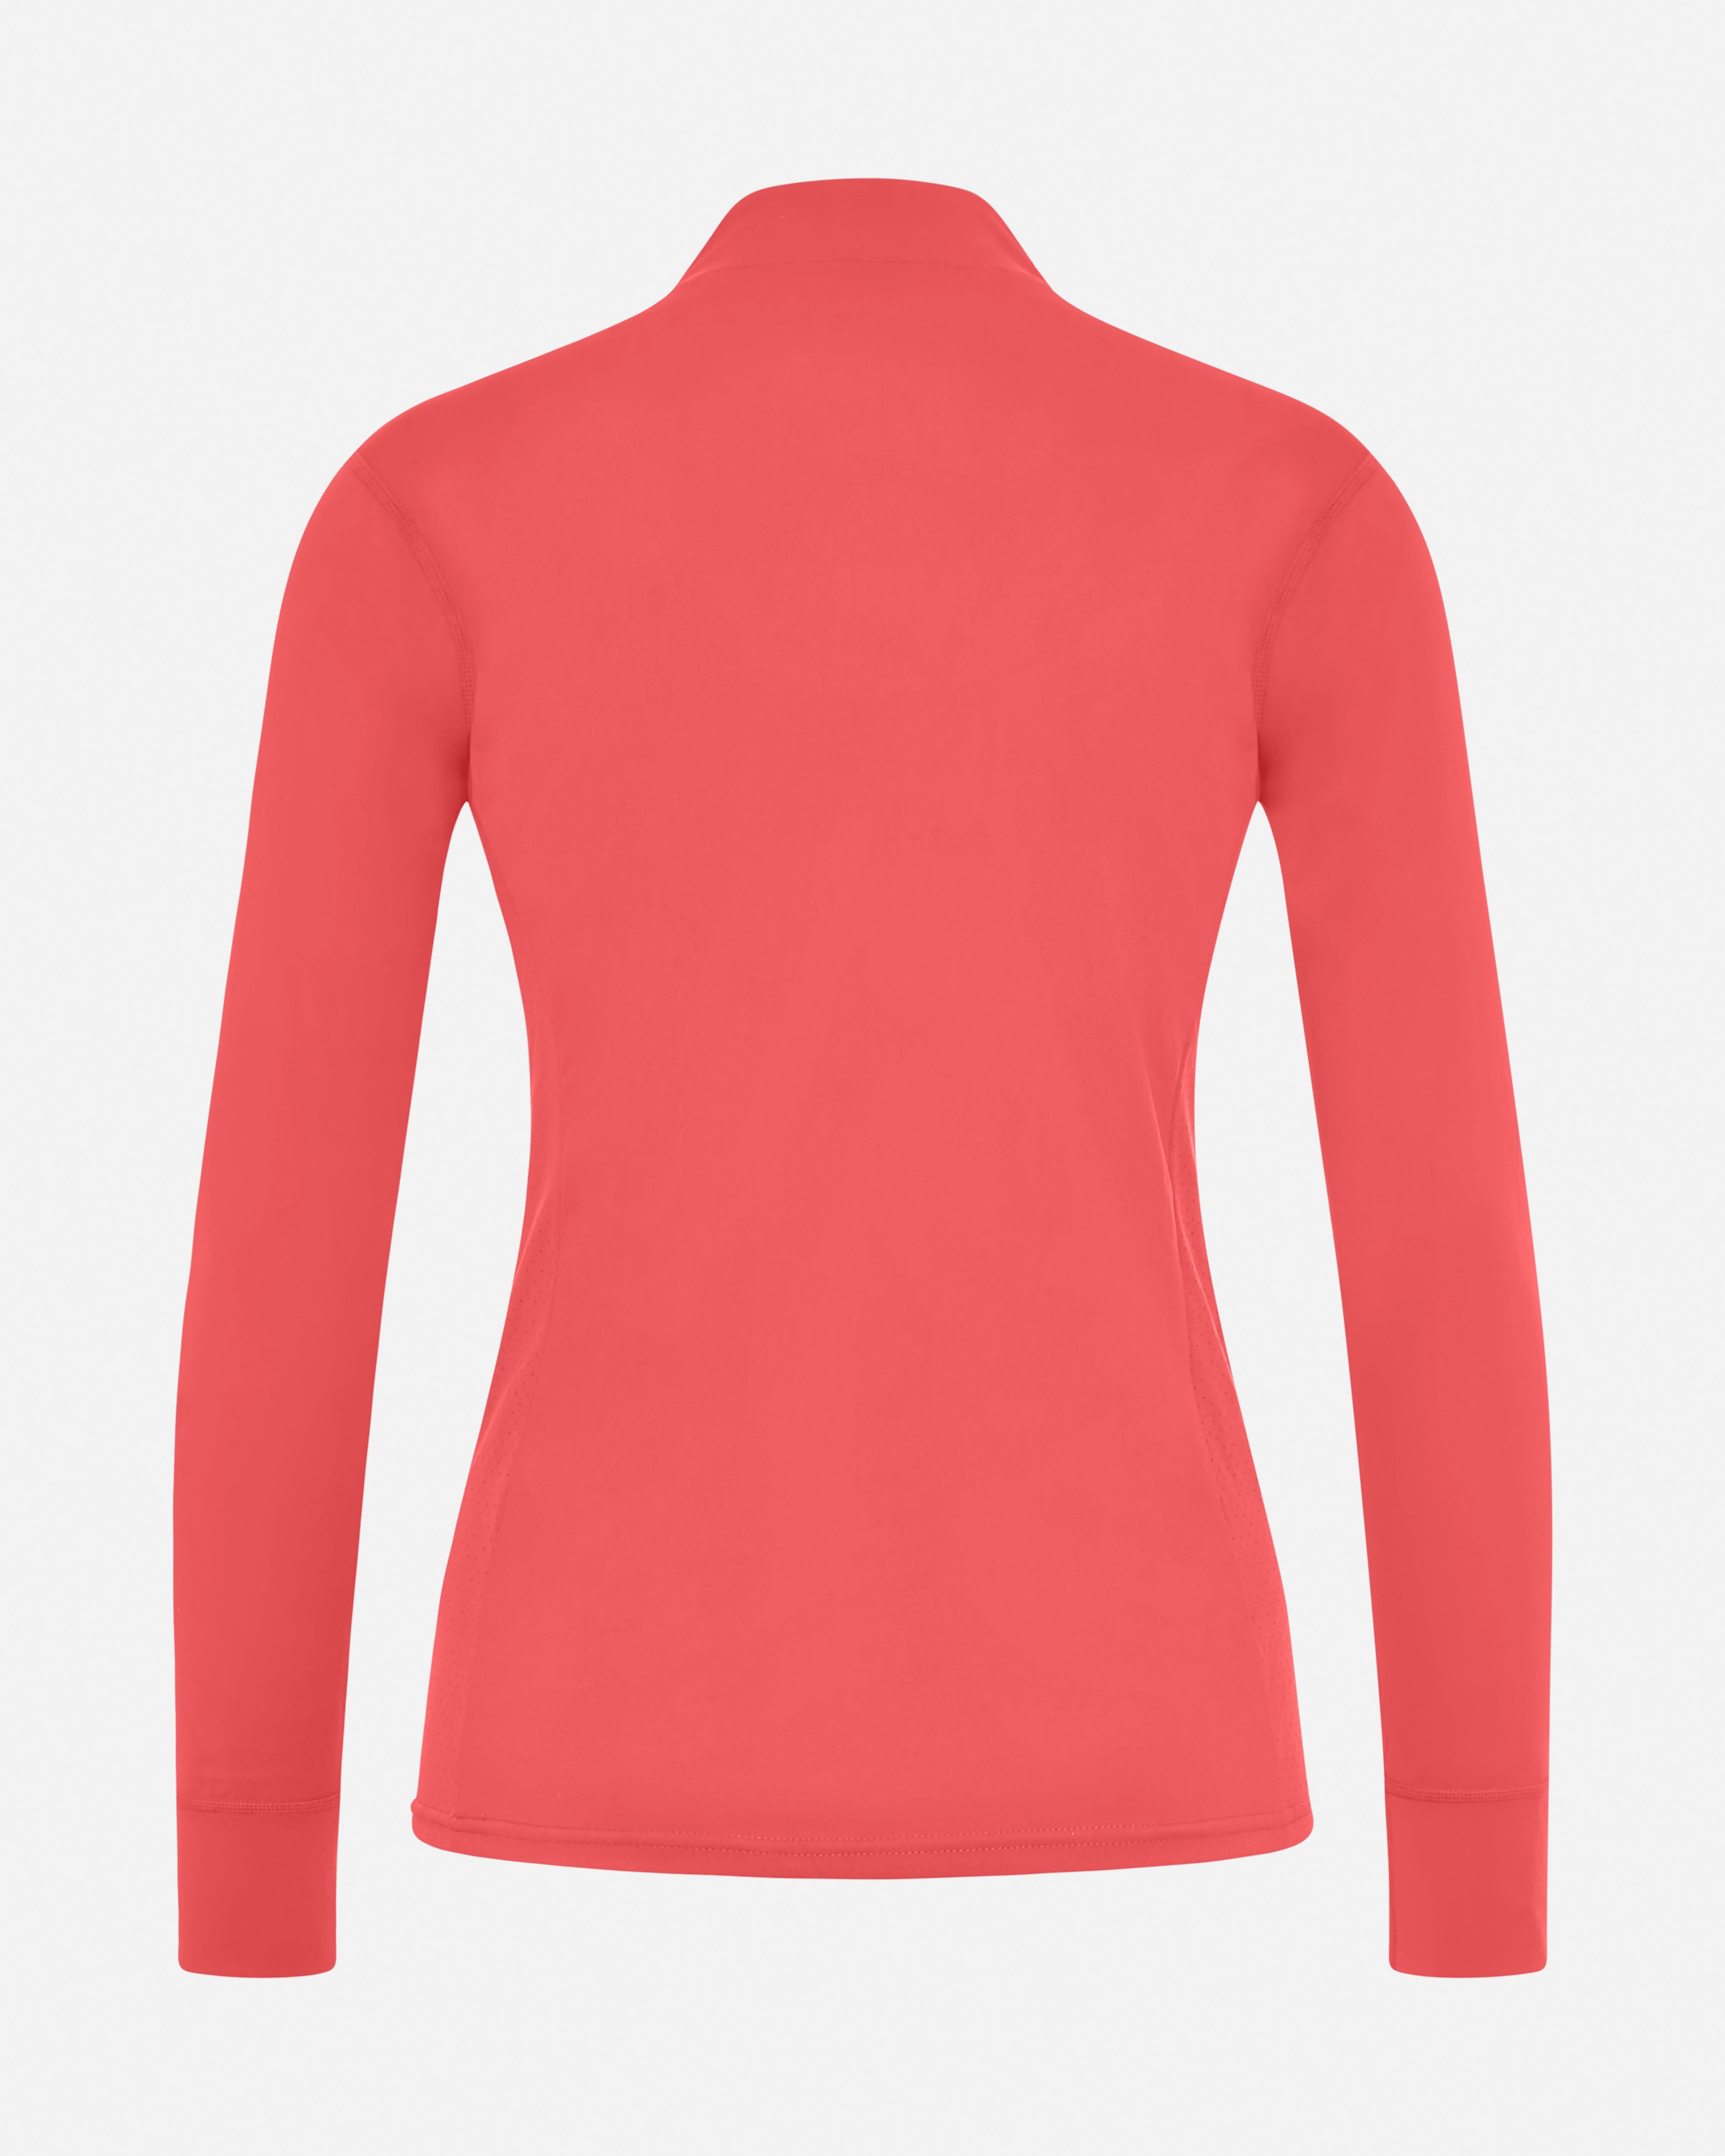 eaSt UV-Protection Shirt | Coral | M